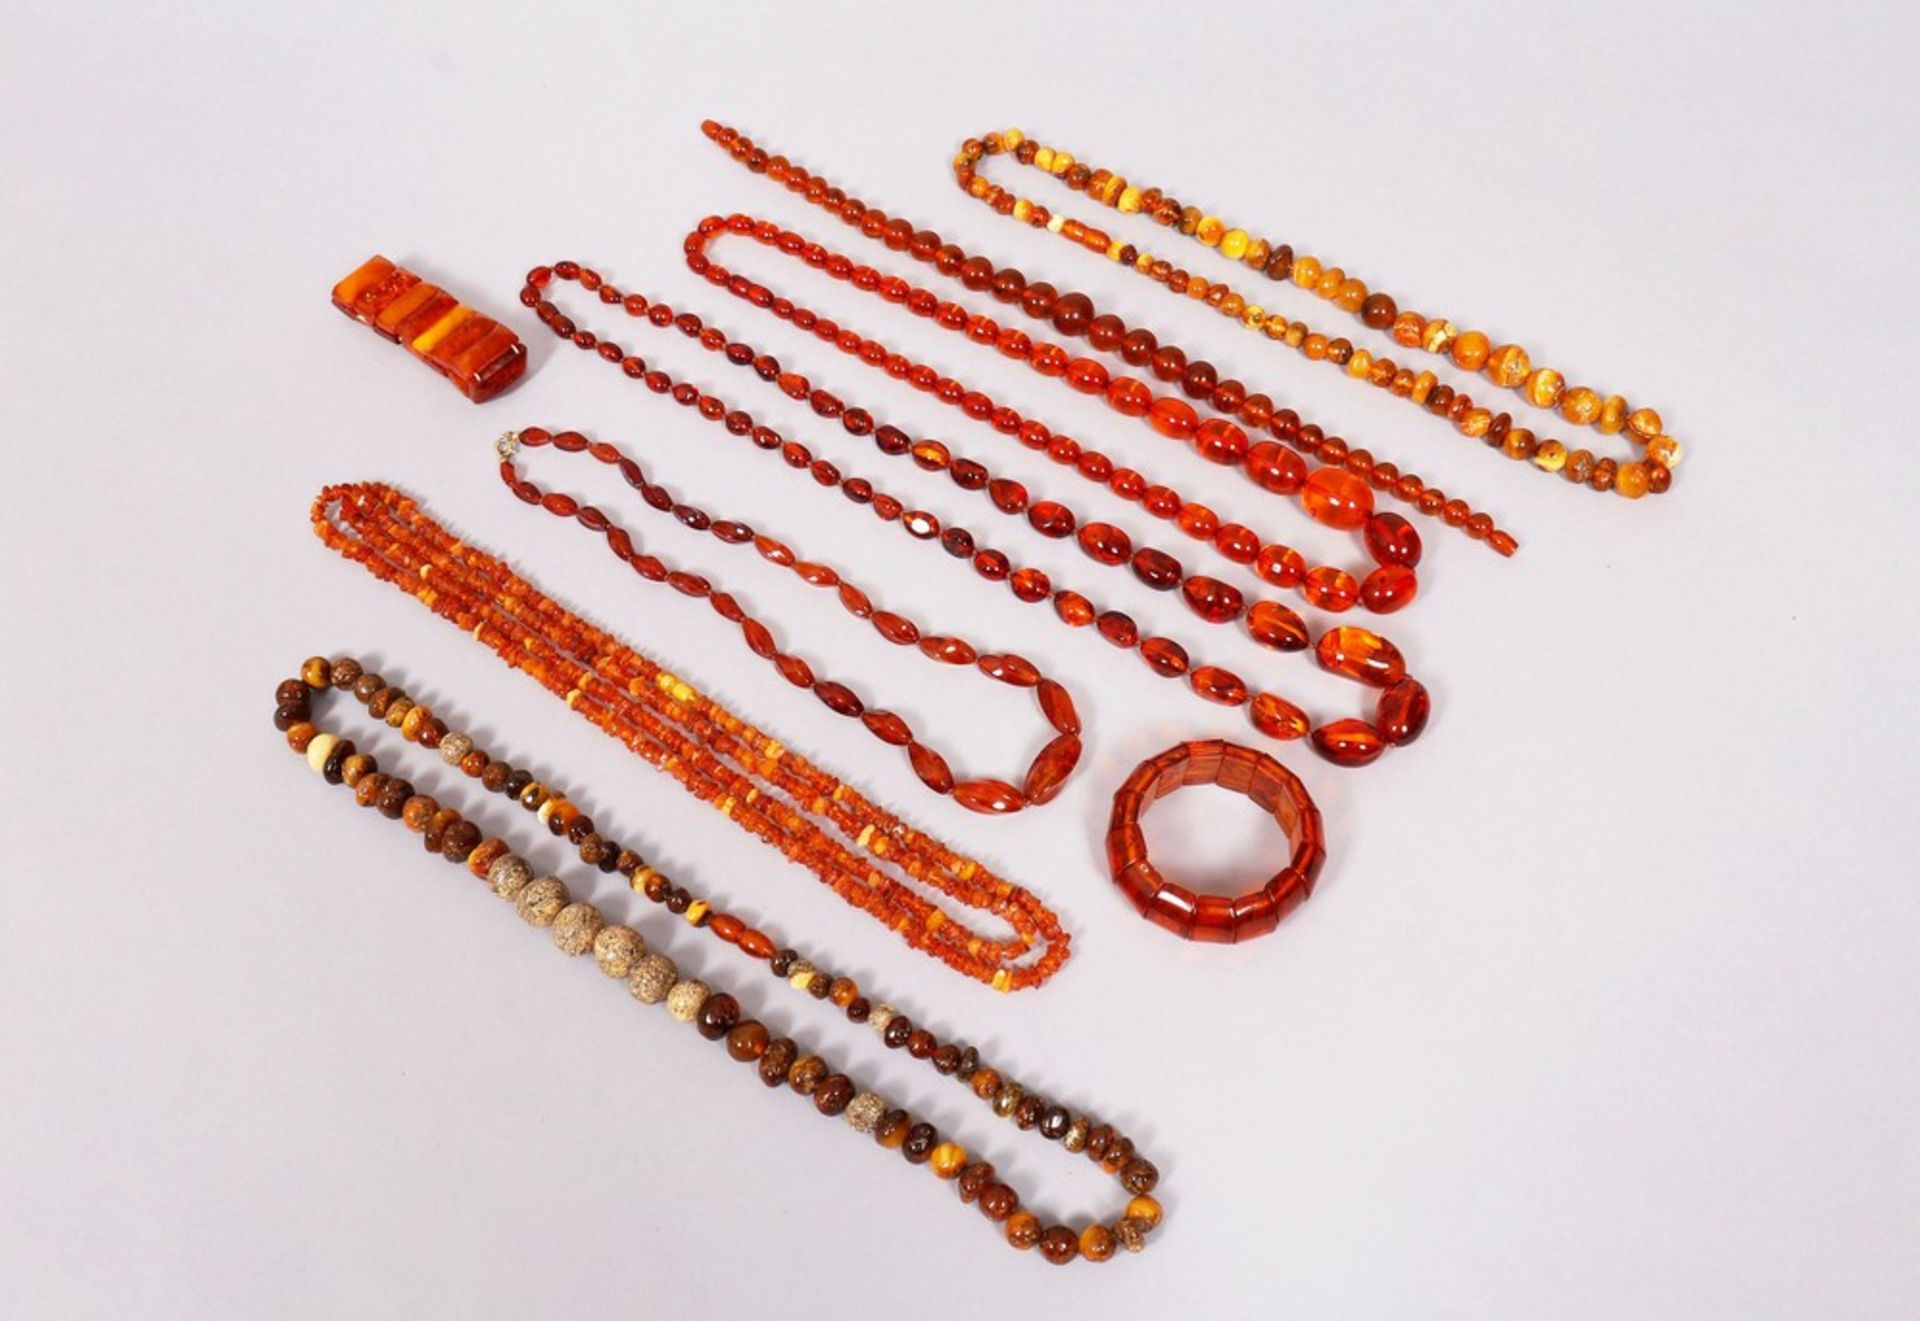 8 amber necklaces and 2 bracelets